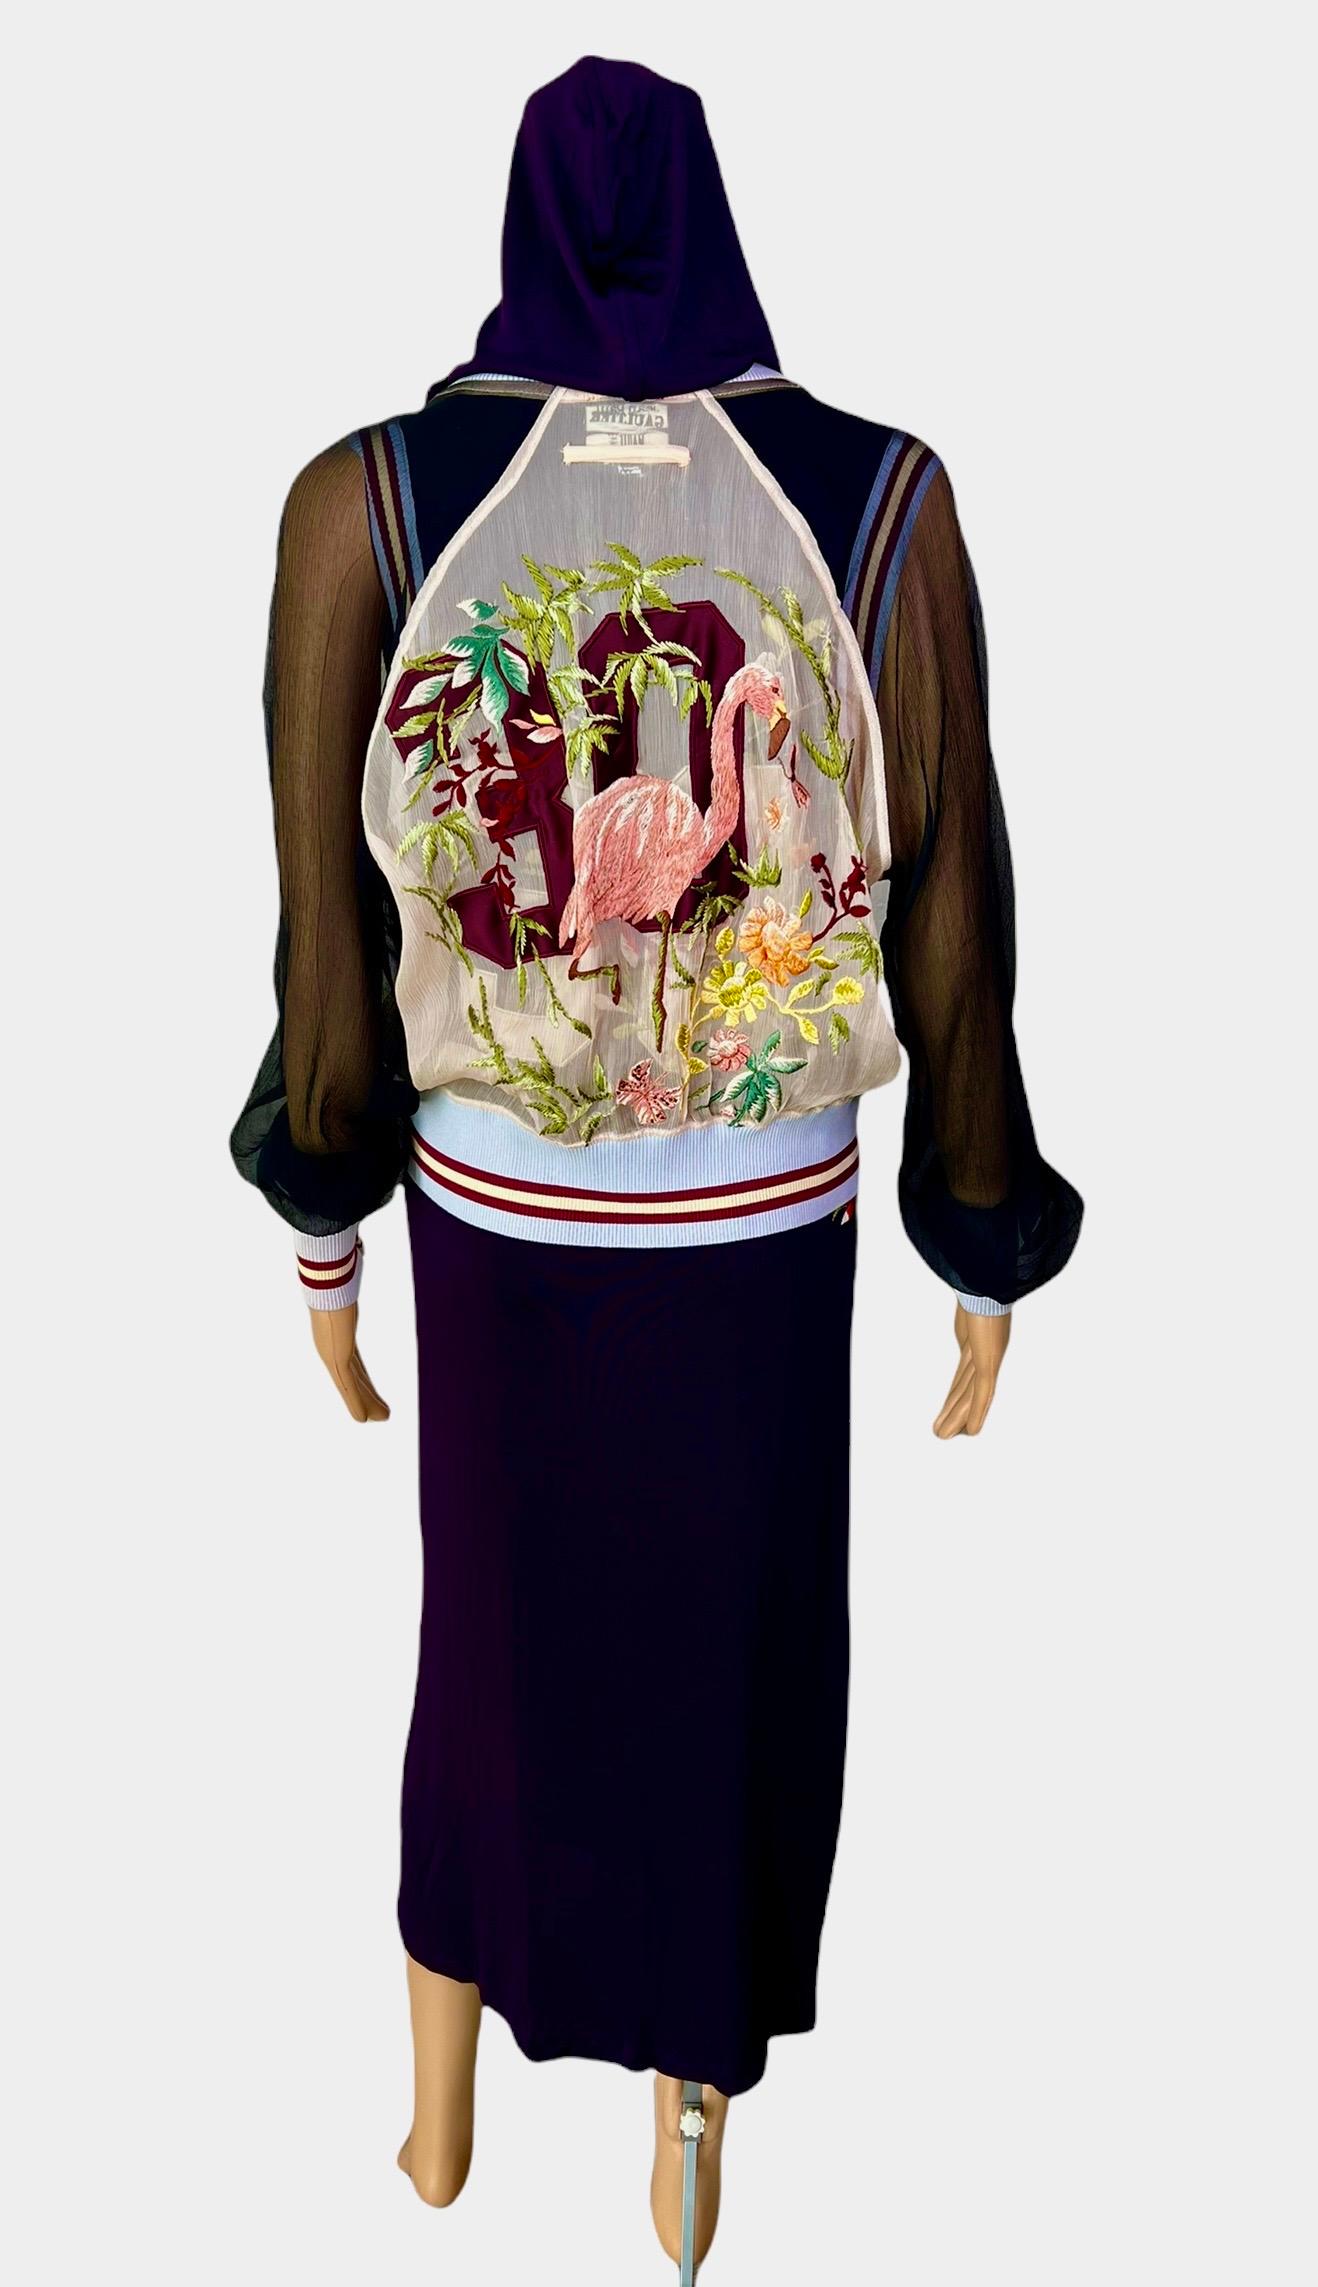 Jean Paul Gaultier S/S 2007 Embroidered Sheer Hooded Jacket & Dress 2 Piece Set  For Sale 2